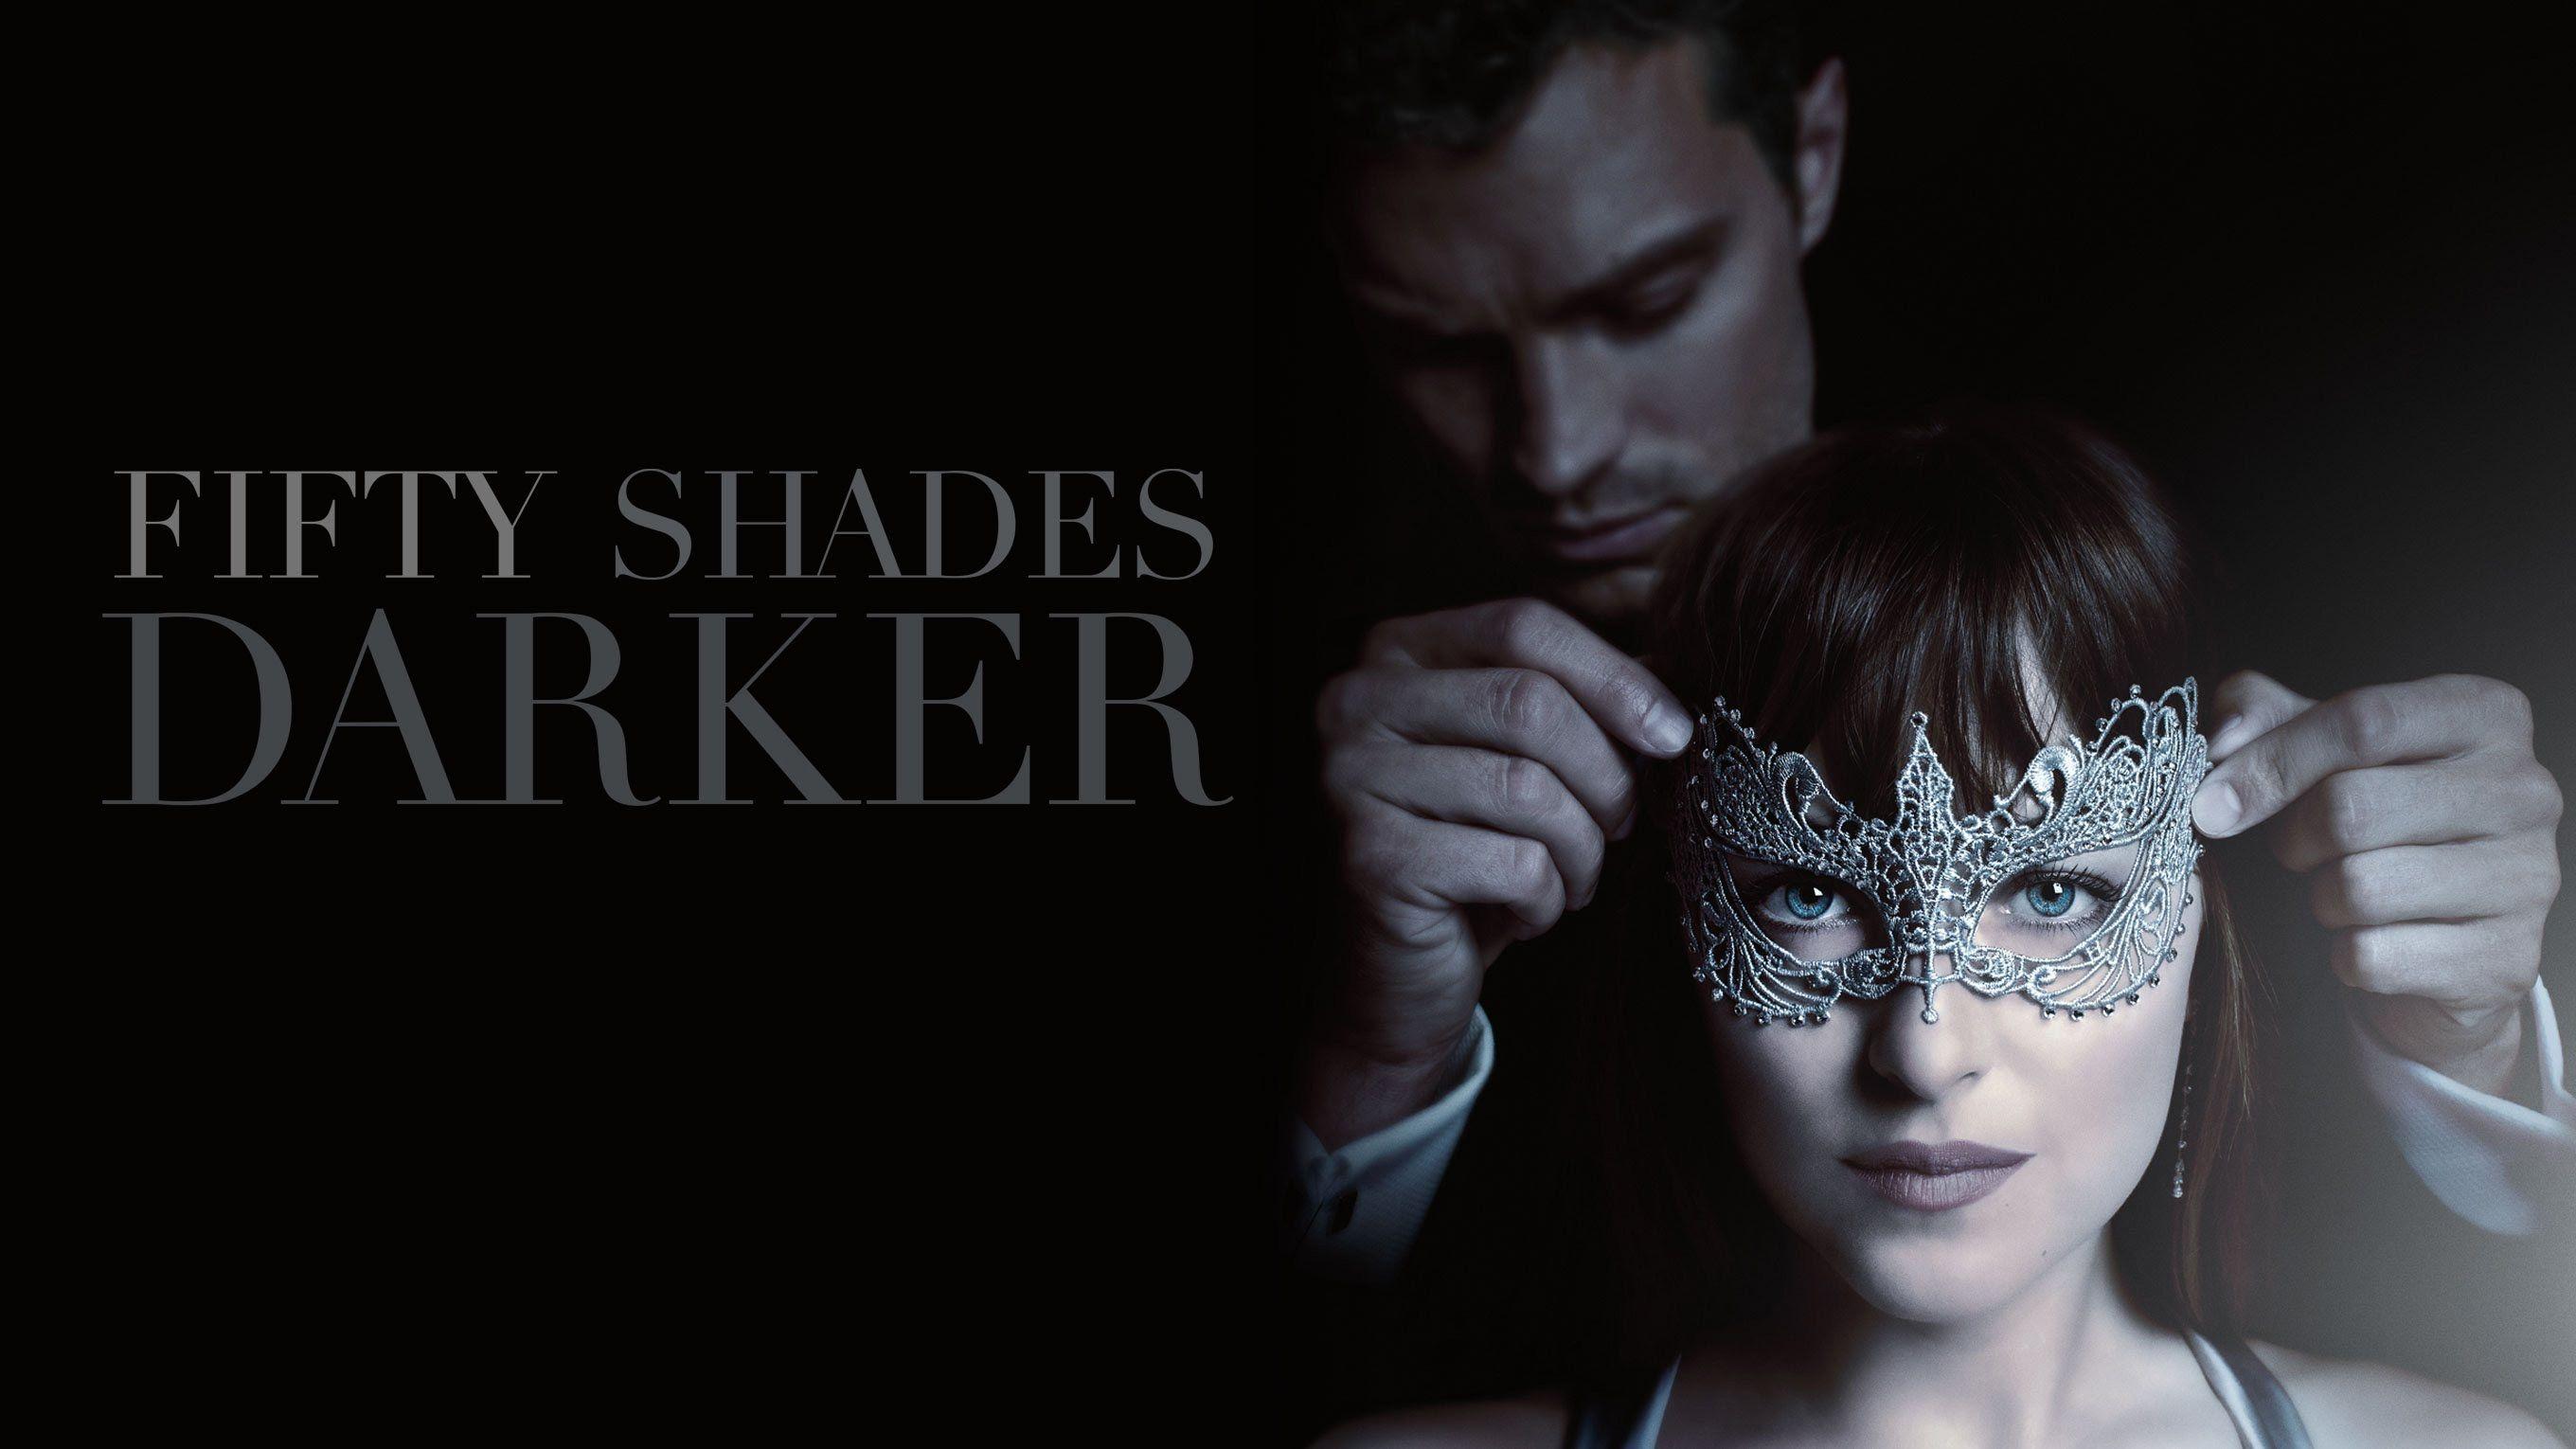 Fifty Shades Darker (Hamburg Premiere). What's On The Red Carpet